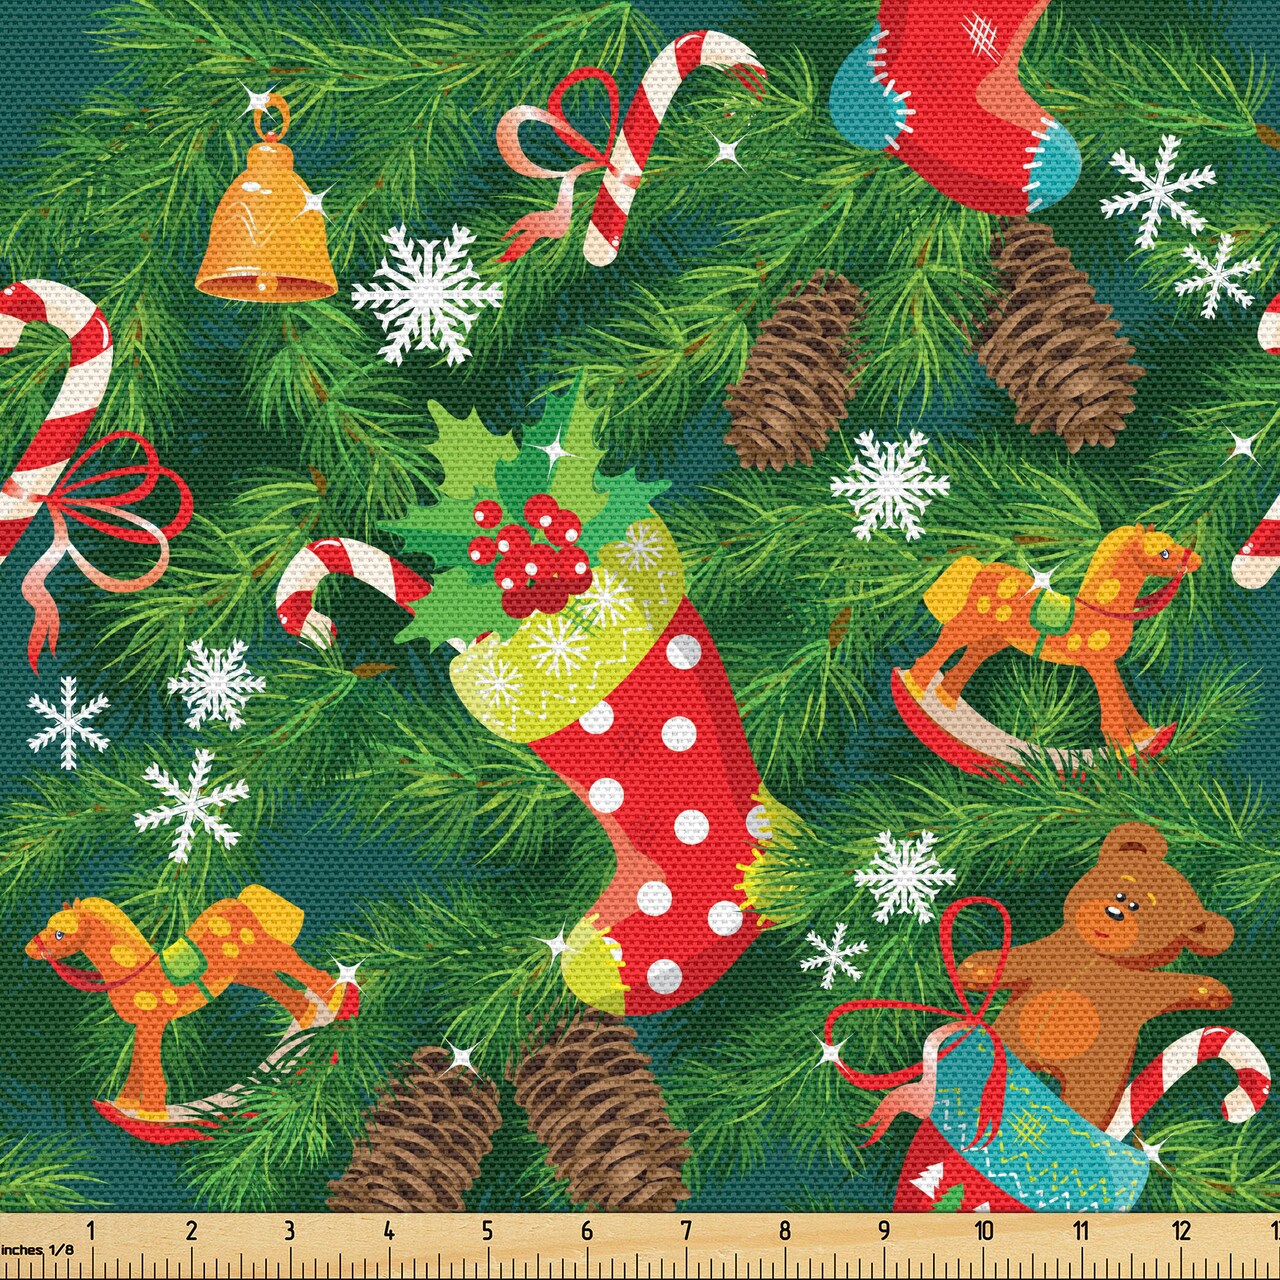 Ambesonne Christmas Fabric by The Yard, Xmas Accessories Stockings Candies Horse Teddy Bear Toys on Pine, Decorative Fabric for Upholstery and Home Accents, 10 Yards, Green Brown